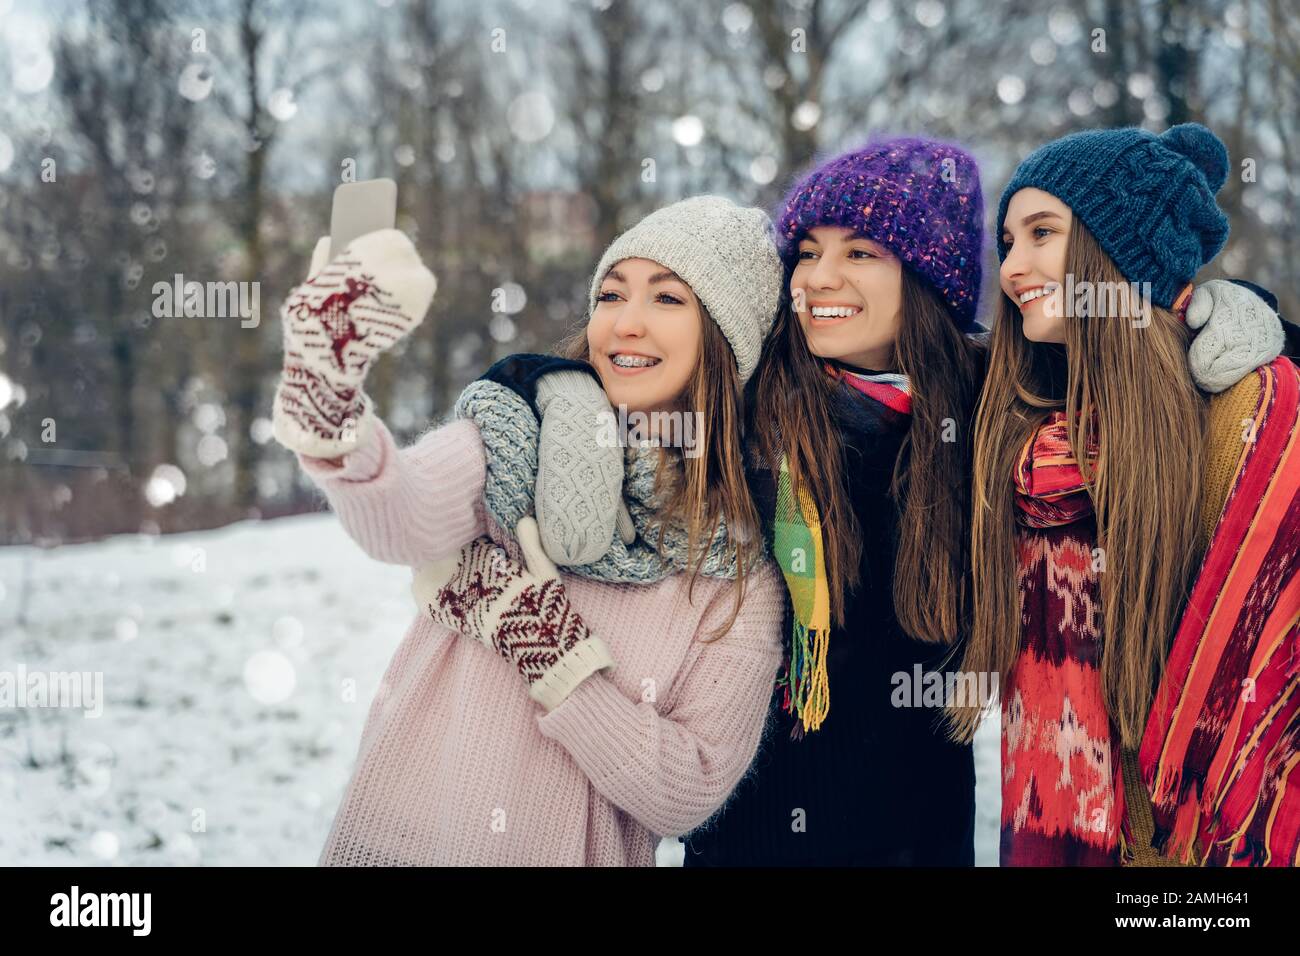 Three women friends outdoors in knitted hats using mobile phone on a snowy cold weather. Group of young female friends enjoying taking selfies Stock Photo